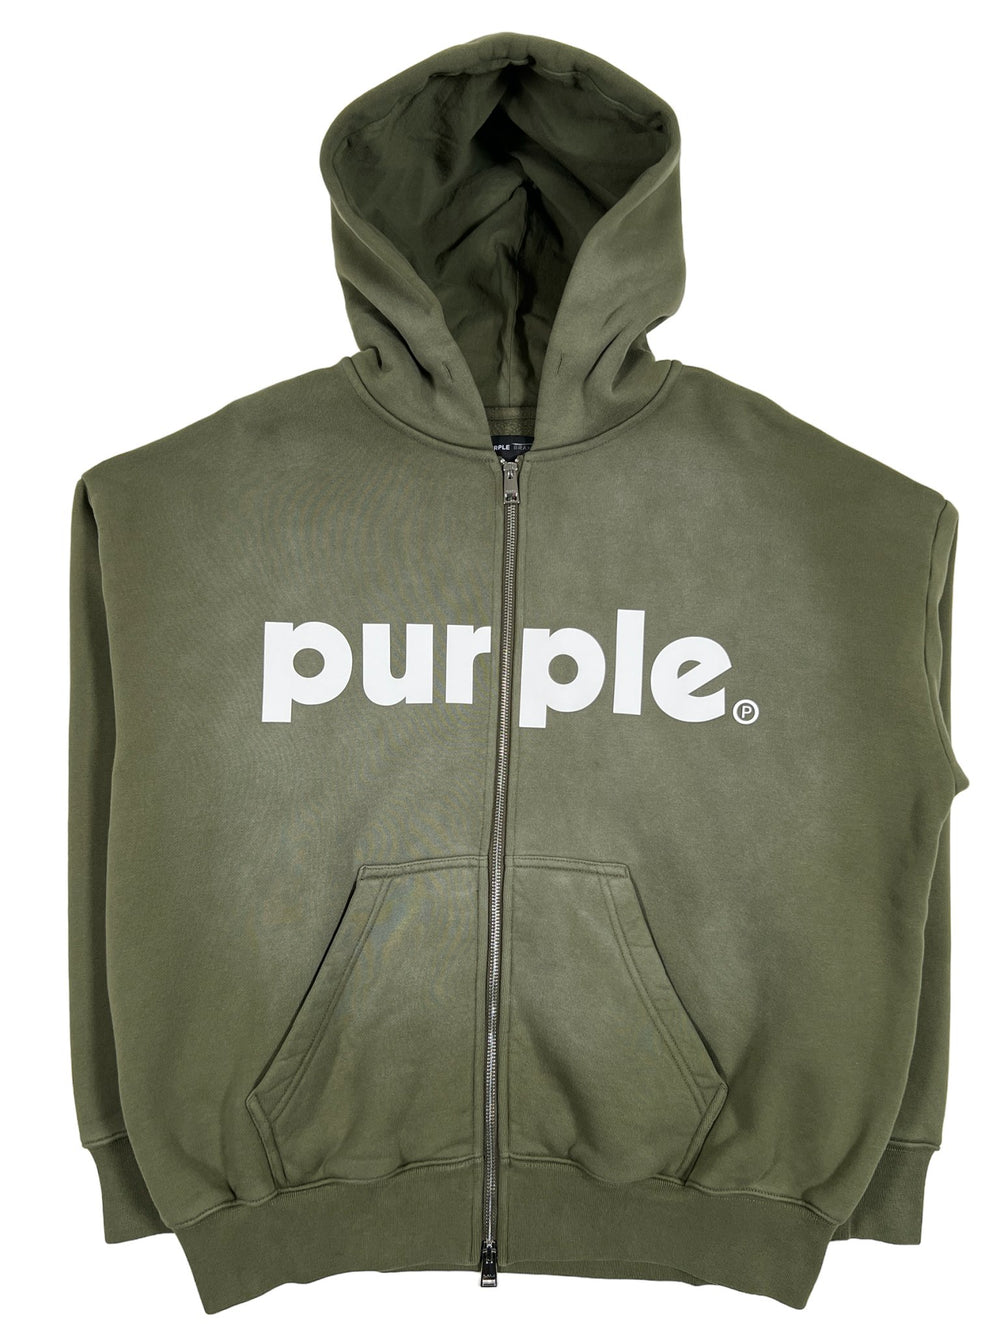 PURPLE BRAND grey zip up hoodie is a stylish and comfortable choice,  perfect for adding a pop of color to your wardrobe. It combines the